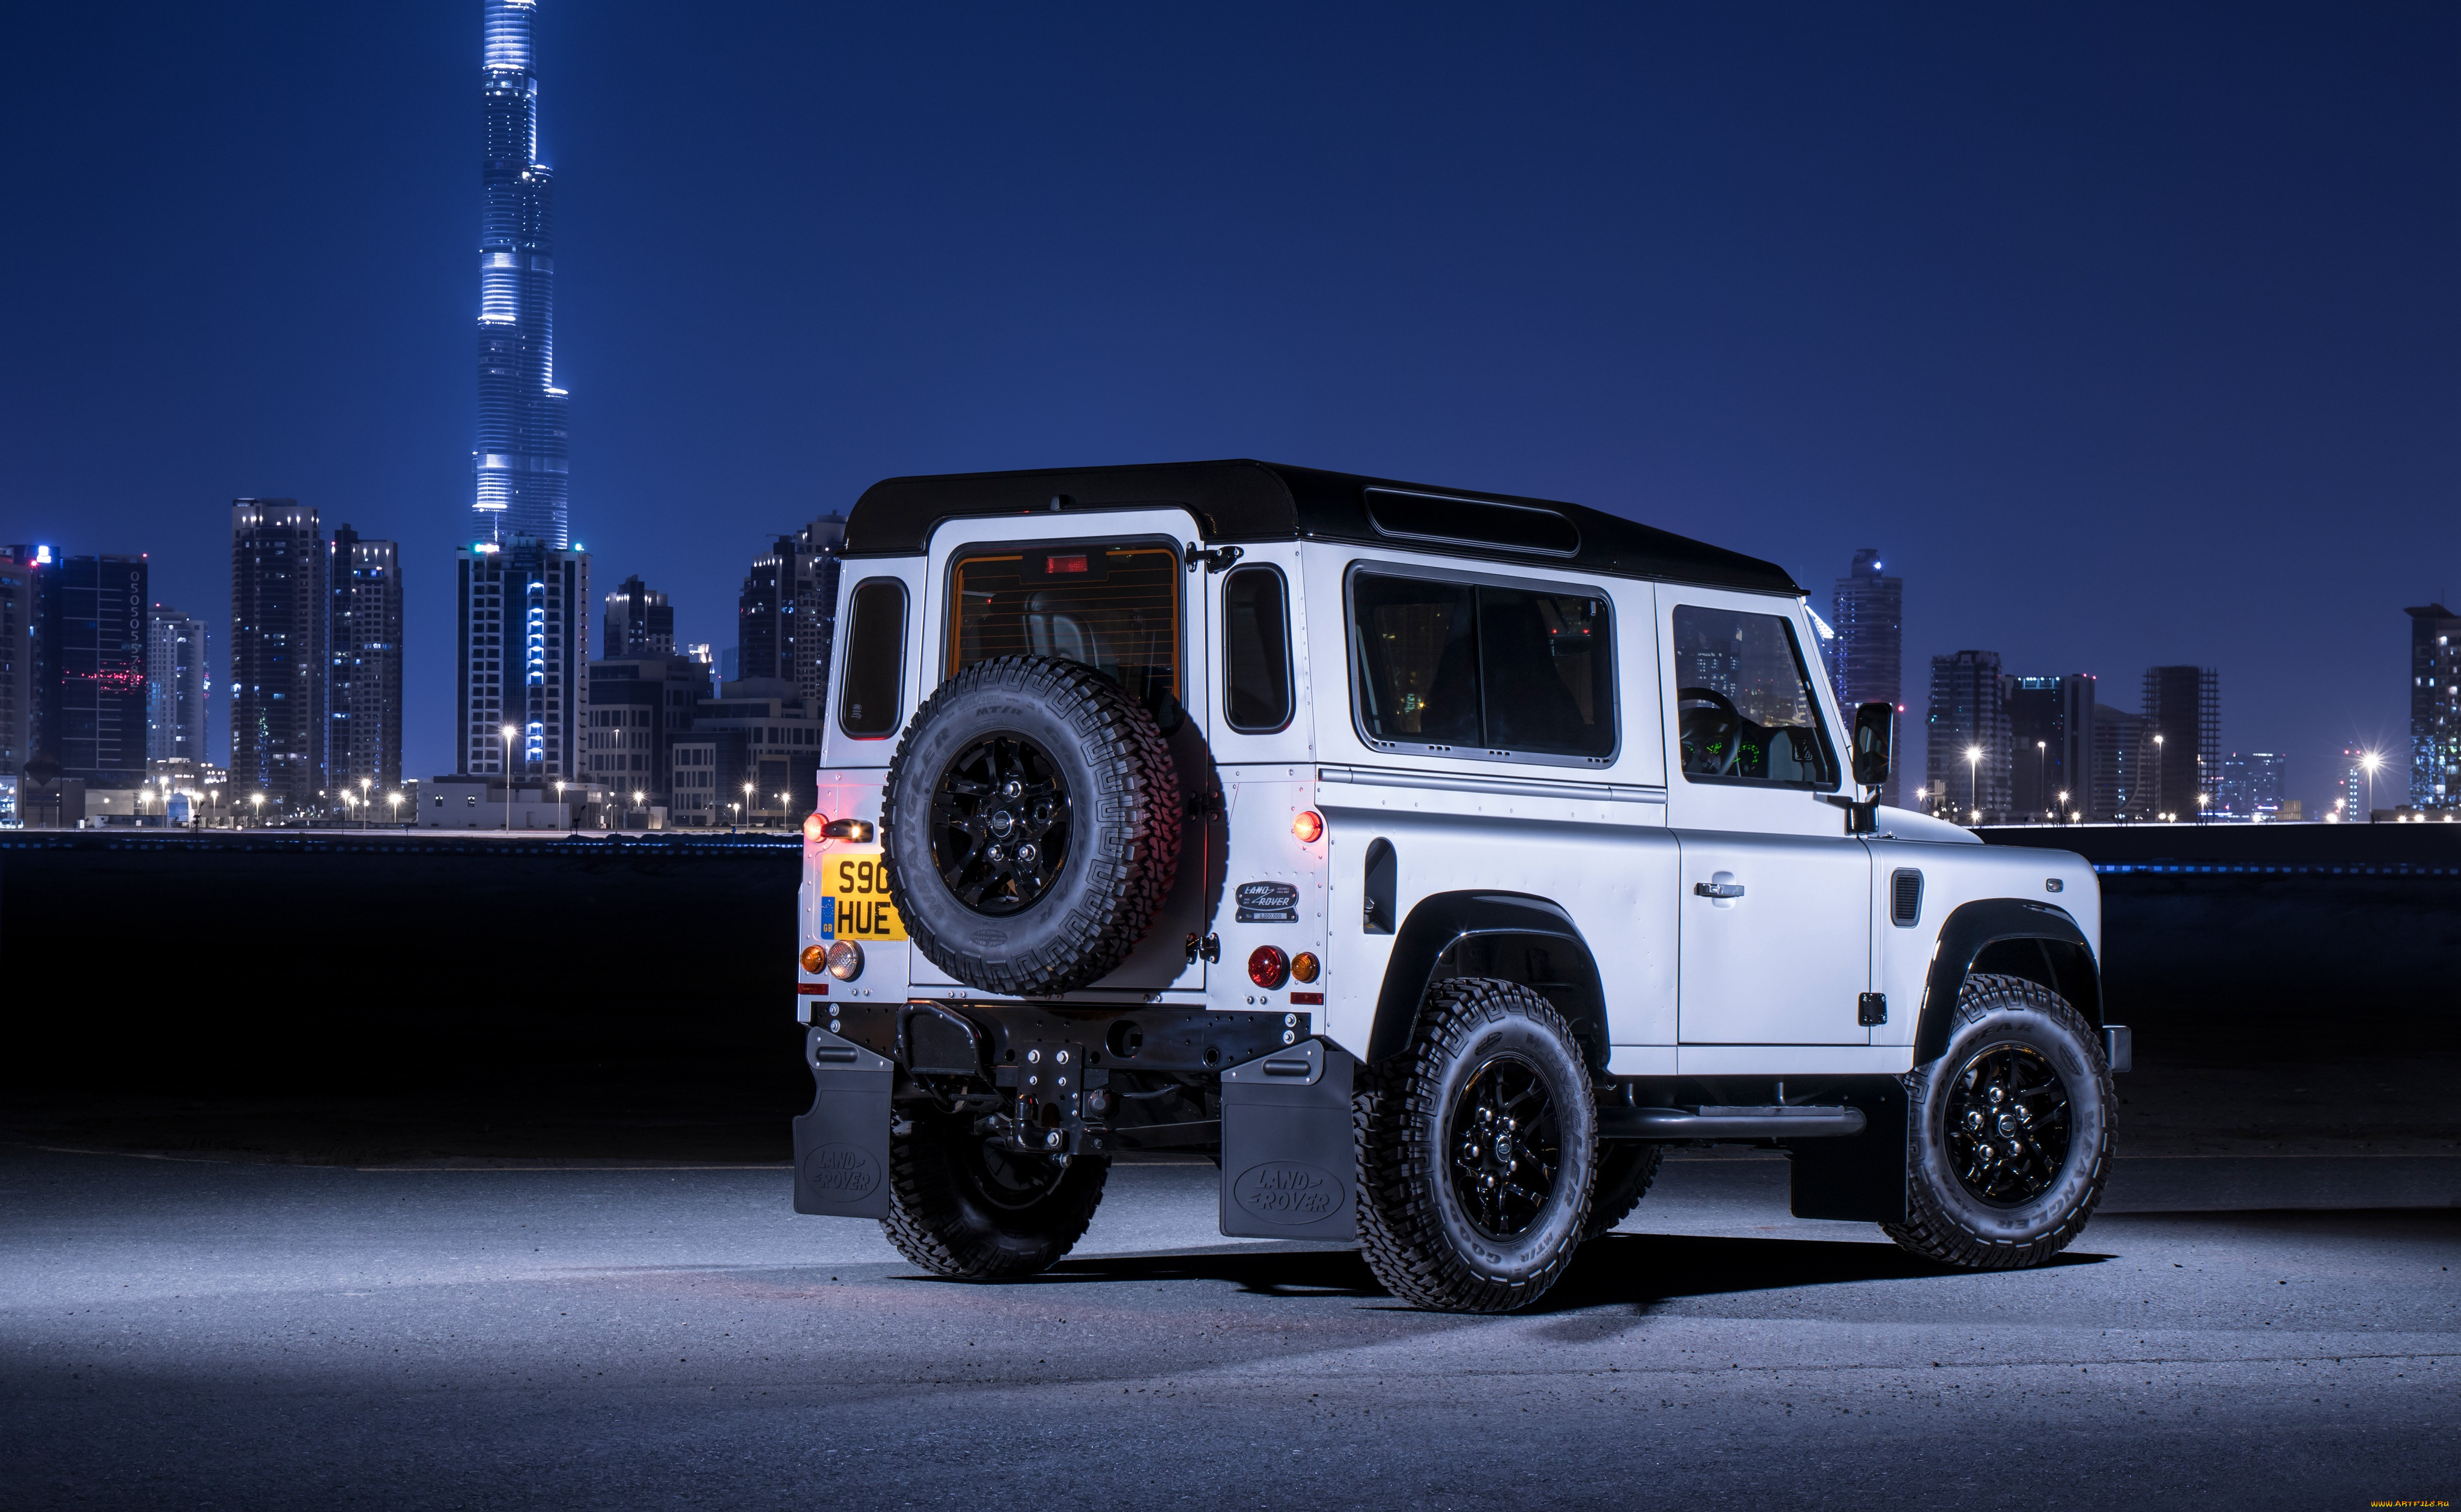 , land-rover, 2015, 2000000th, defender, 90, land, rover